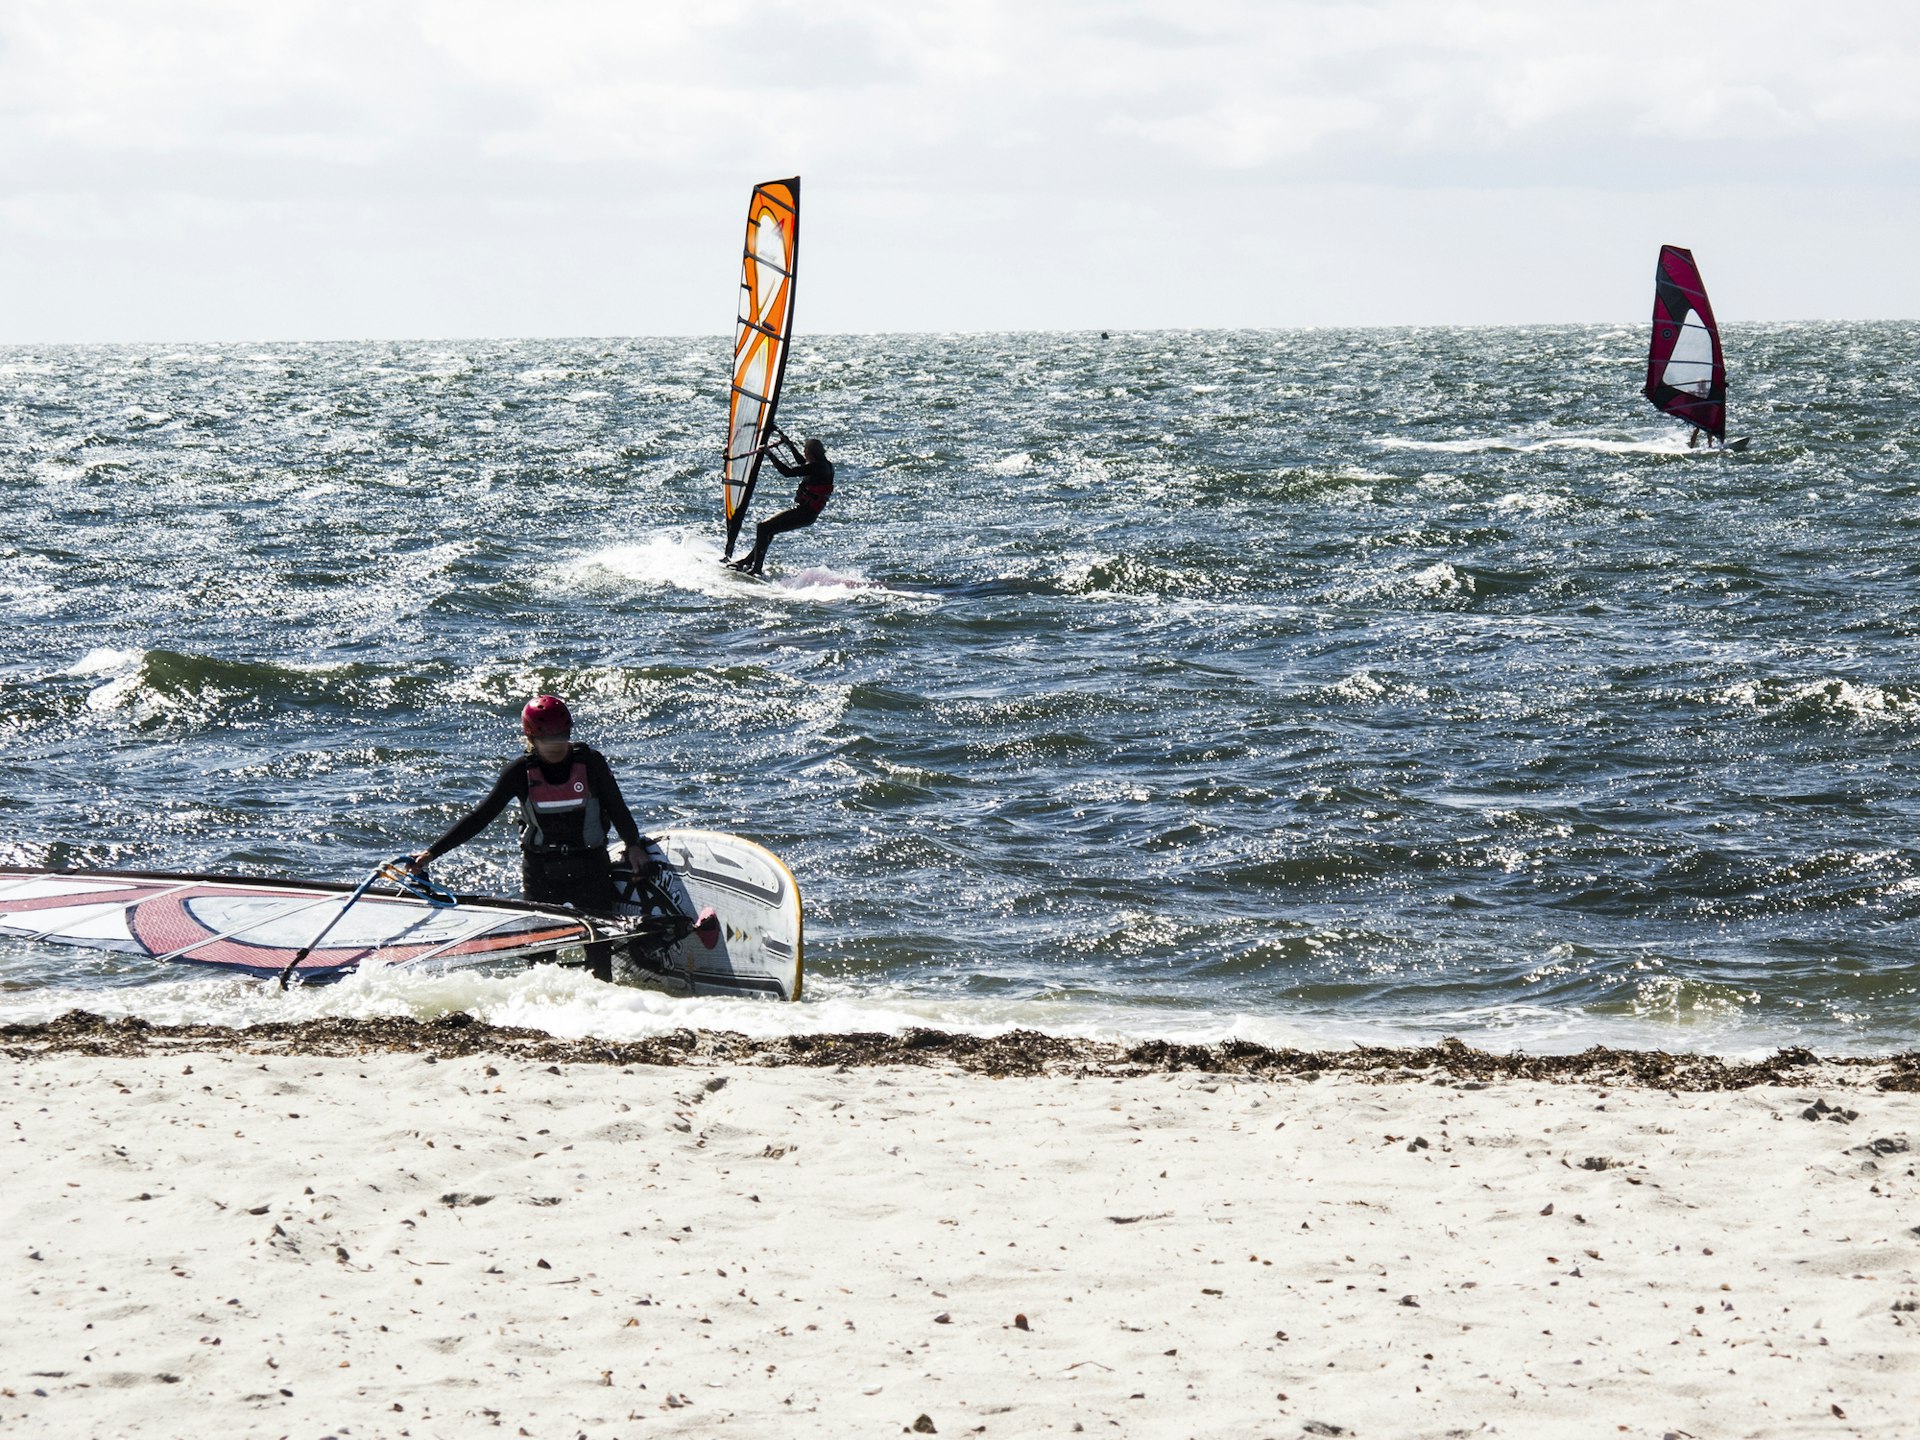 Windsurfers out on the water as one comes in to the shore